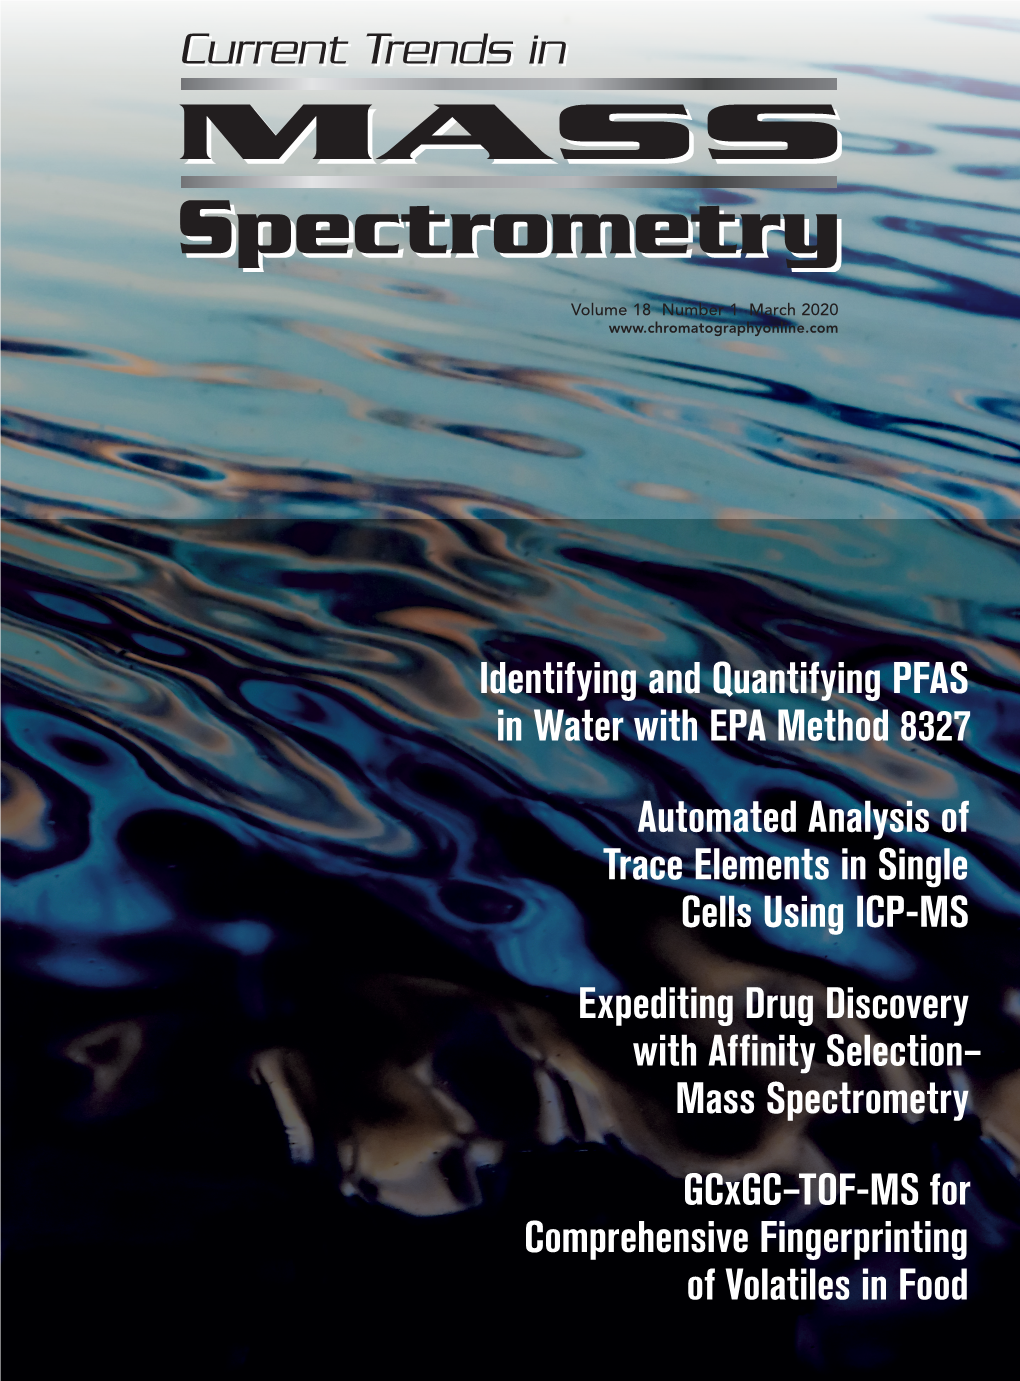 Current Trends in Mass Spectrometry March 2020 Chromatographyonline.Com